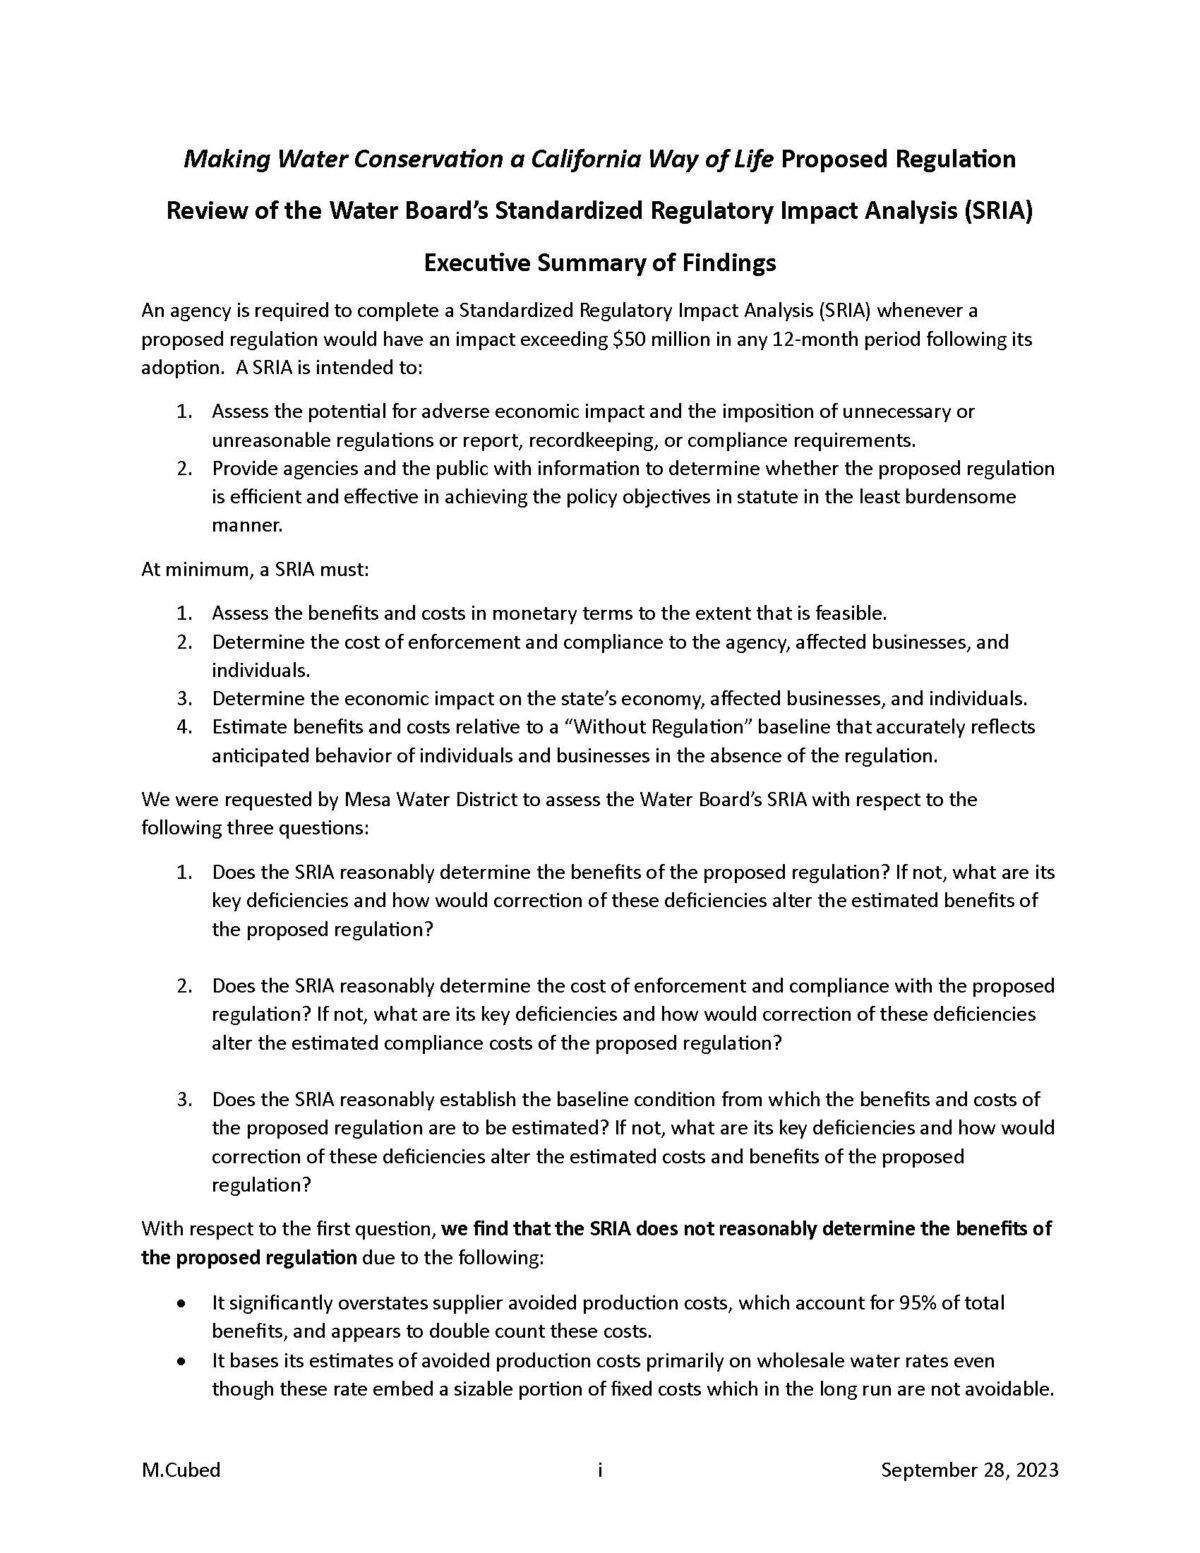 Making Water Conservation a California Way of Life Proposed Regulation Review of the Water Board’s Standardized Regulatory Impact Analysis (SRIA)